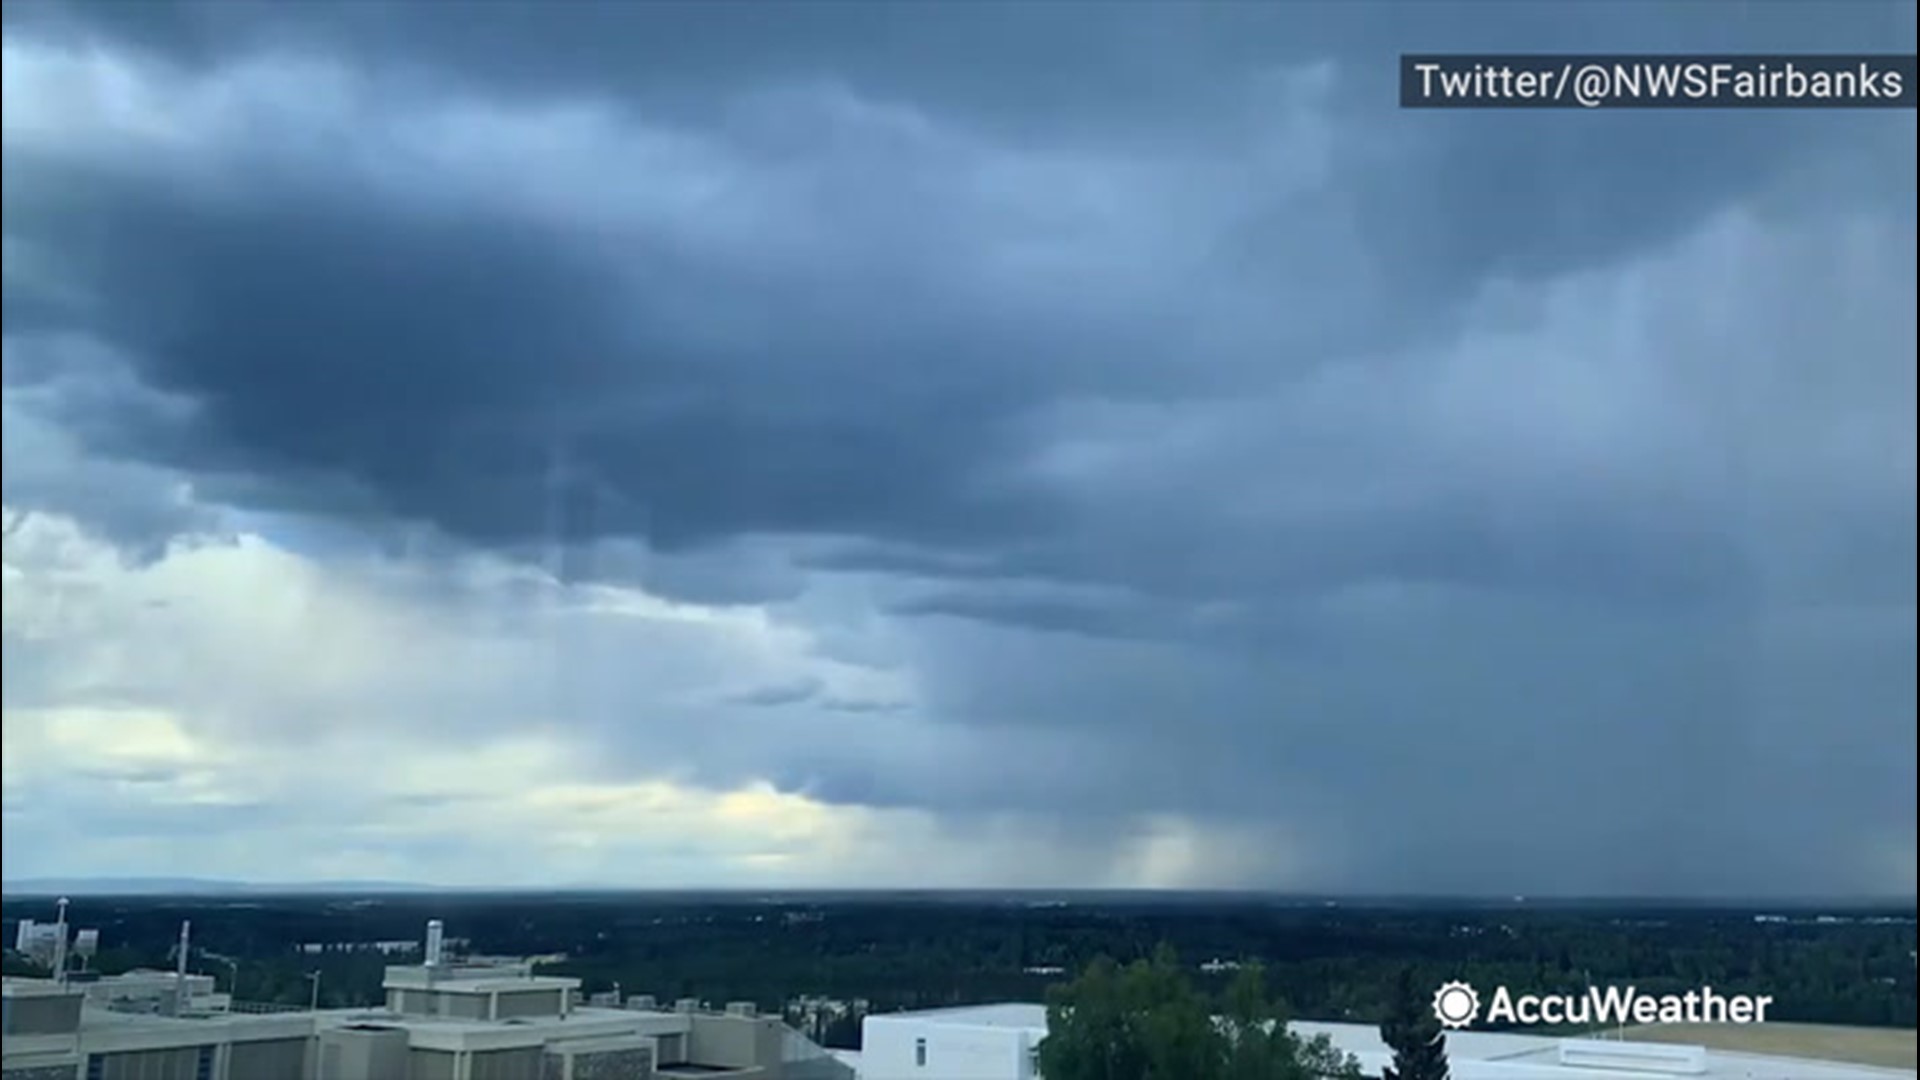 A timelapse shows a thunderstorm moving over Fairbanks, Alaska, on May 31.